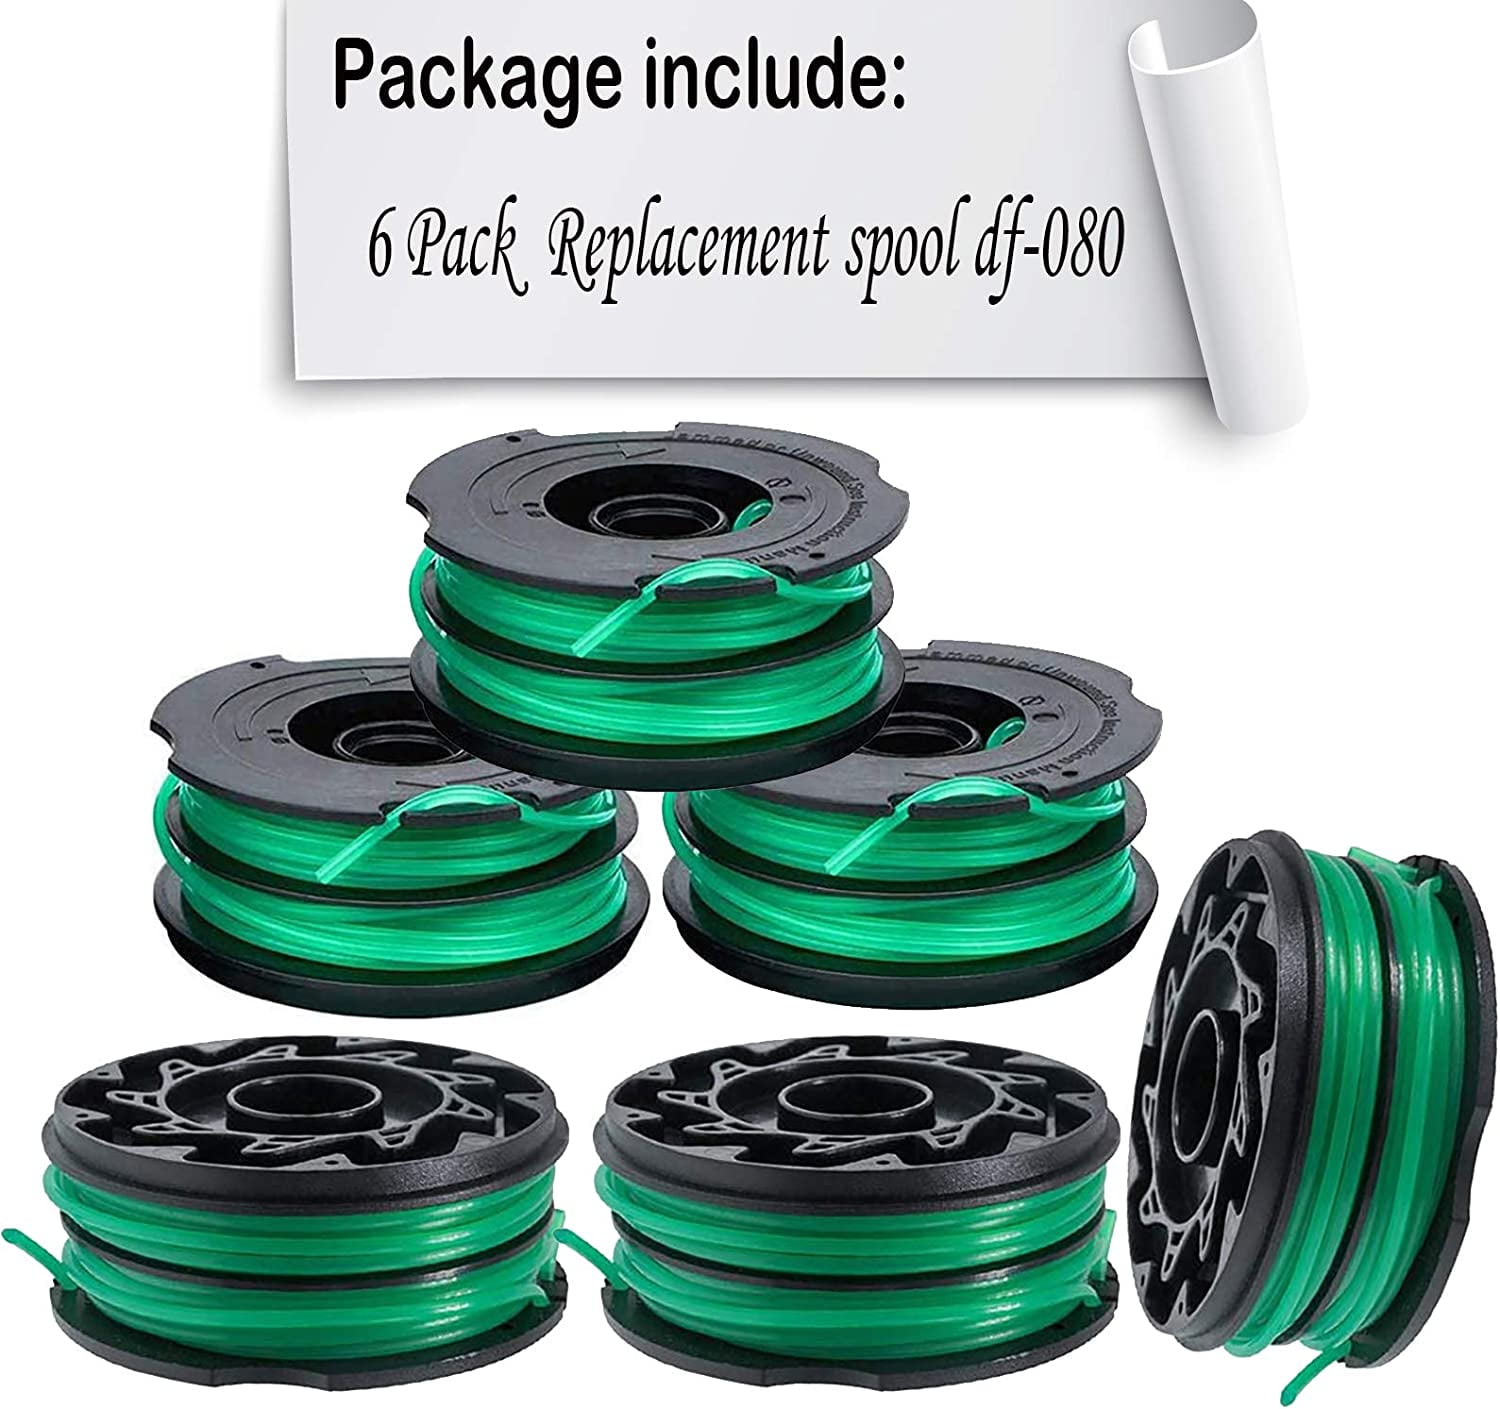 LIYYOO 30ft 0.080-inch DF-080 Trimmer Replacement Spool Compatible